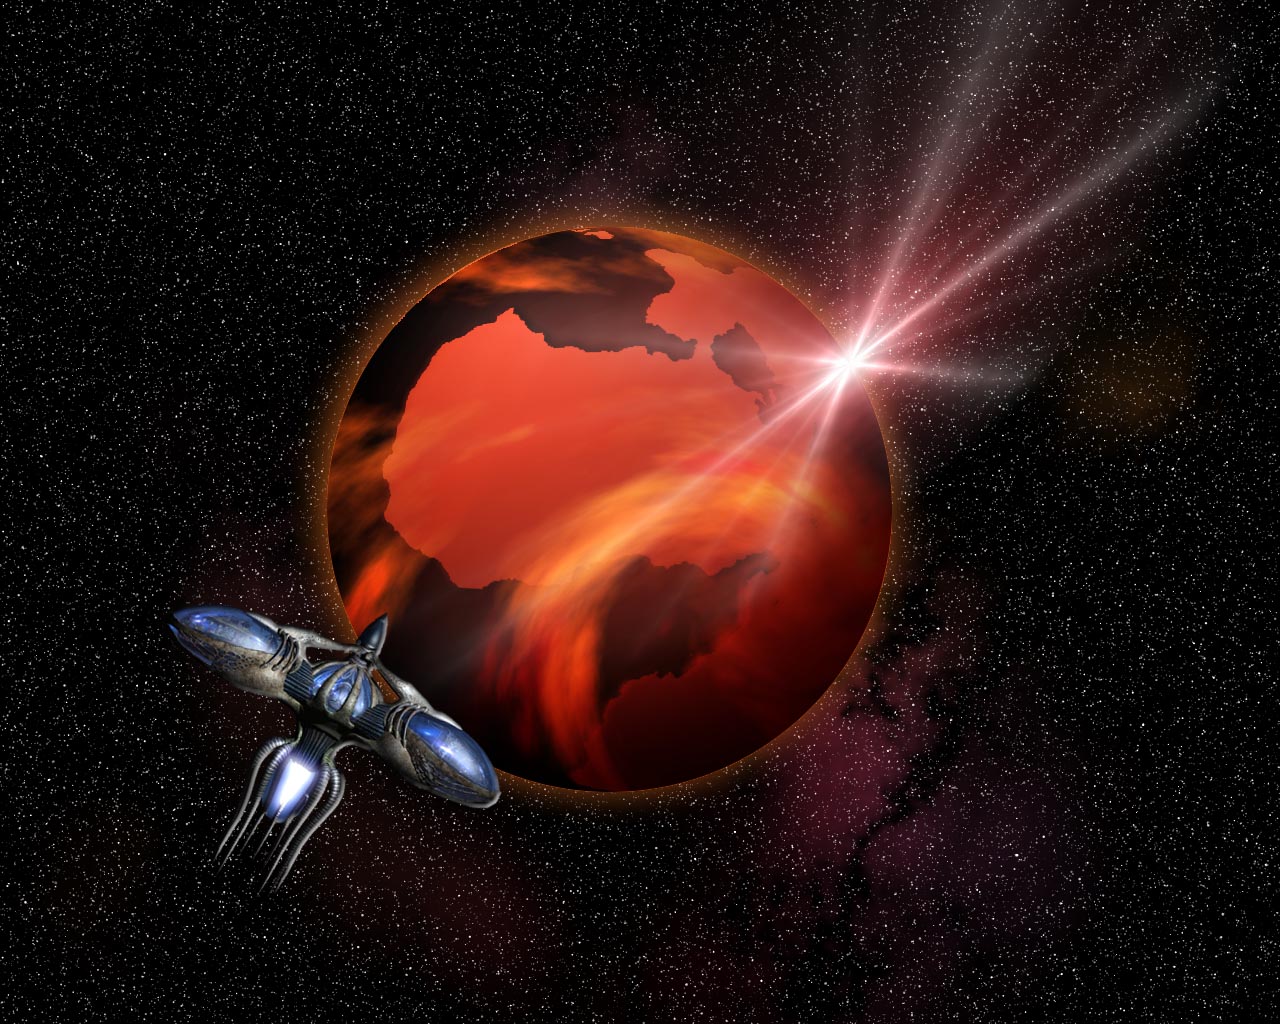 Capillata in Space (Click to enlarge)